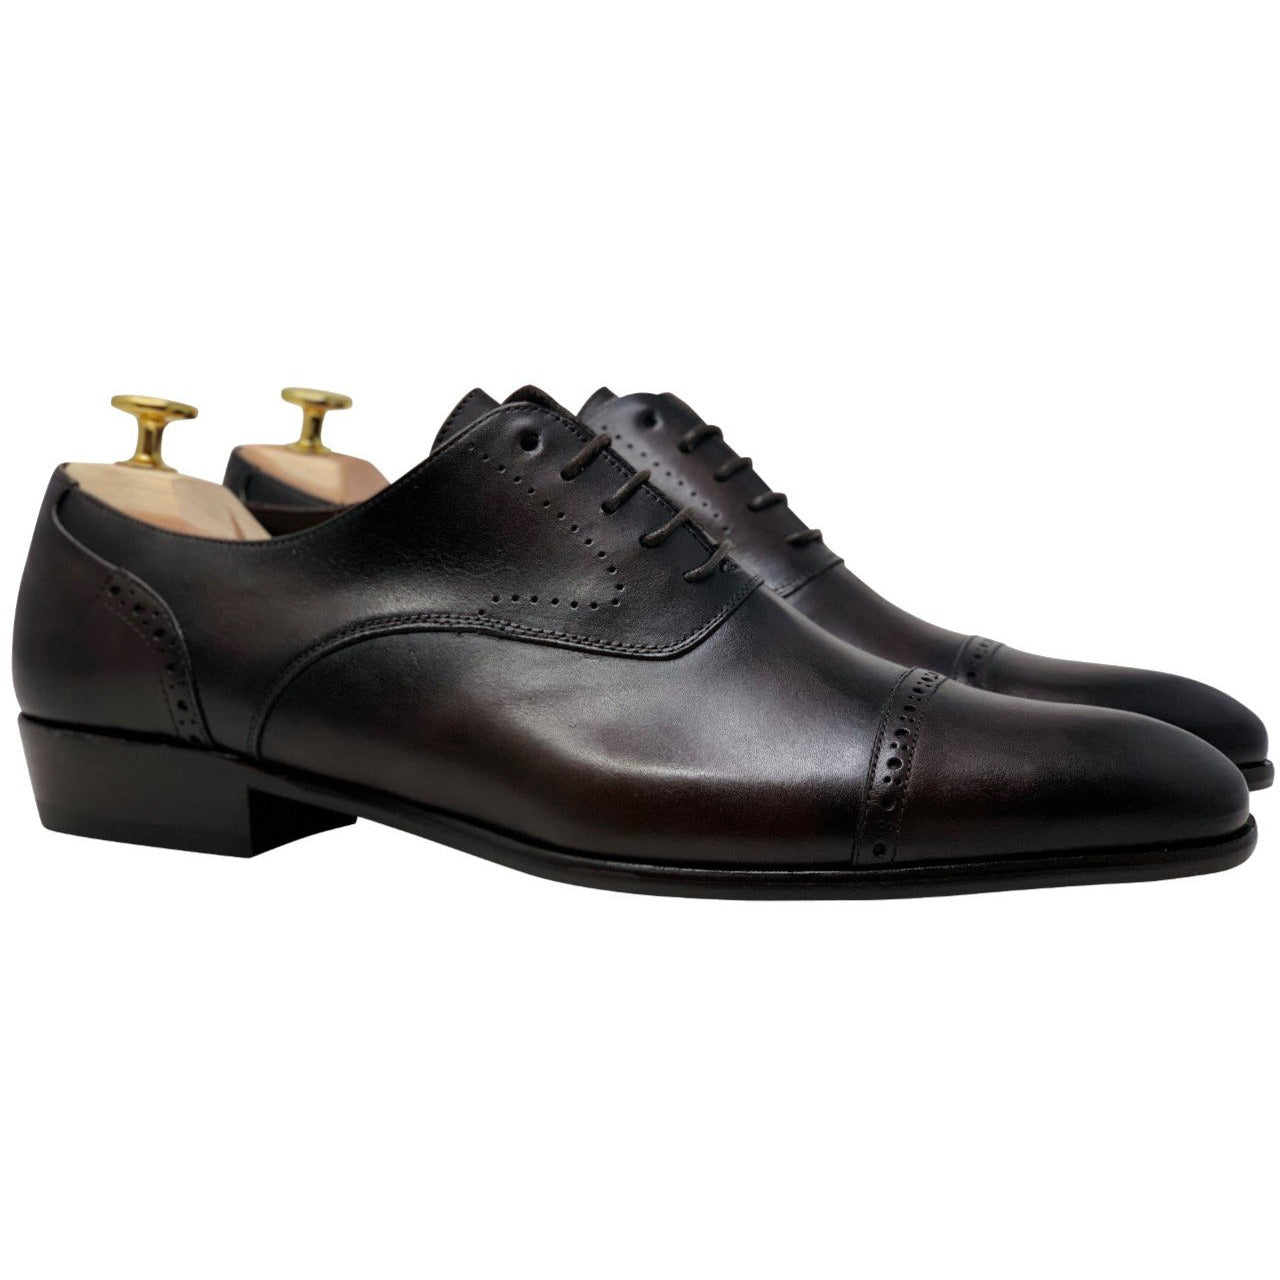 Espresso Spanish Leather Brogue Cap Toe Shoes - The Reyes Series – Somiar